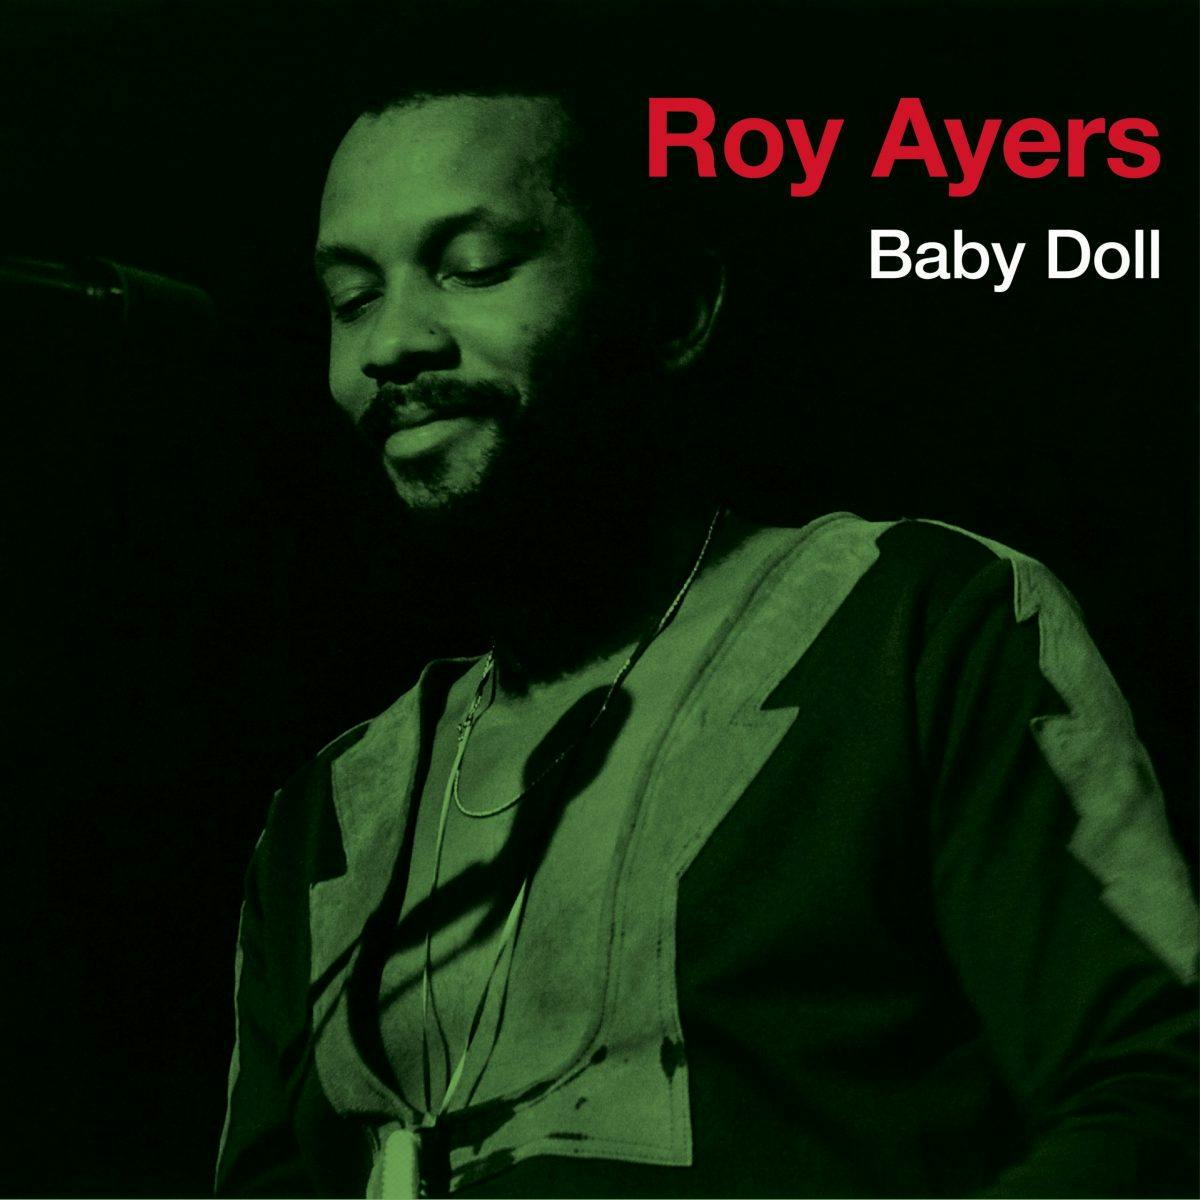 BBE Music presents the first ever digital release for ‘Baby Doll’, a hidden Roy Ayers gem from the 70s, originally issued as a limited 12″ single back in 2003.